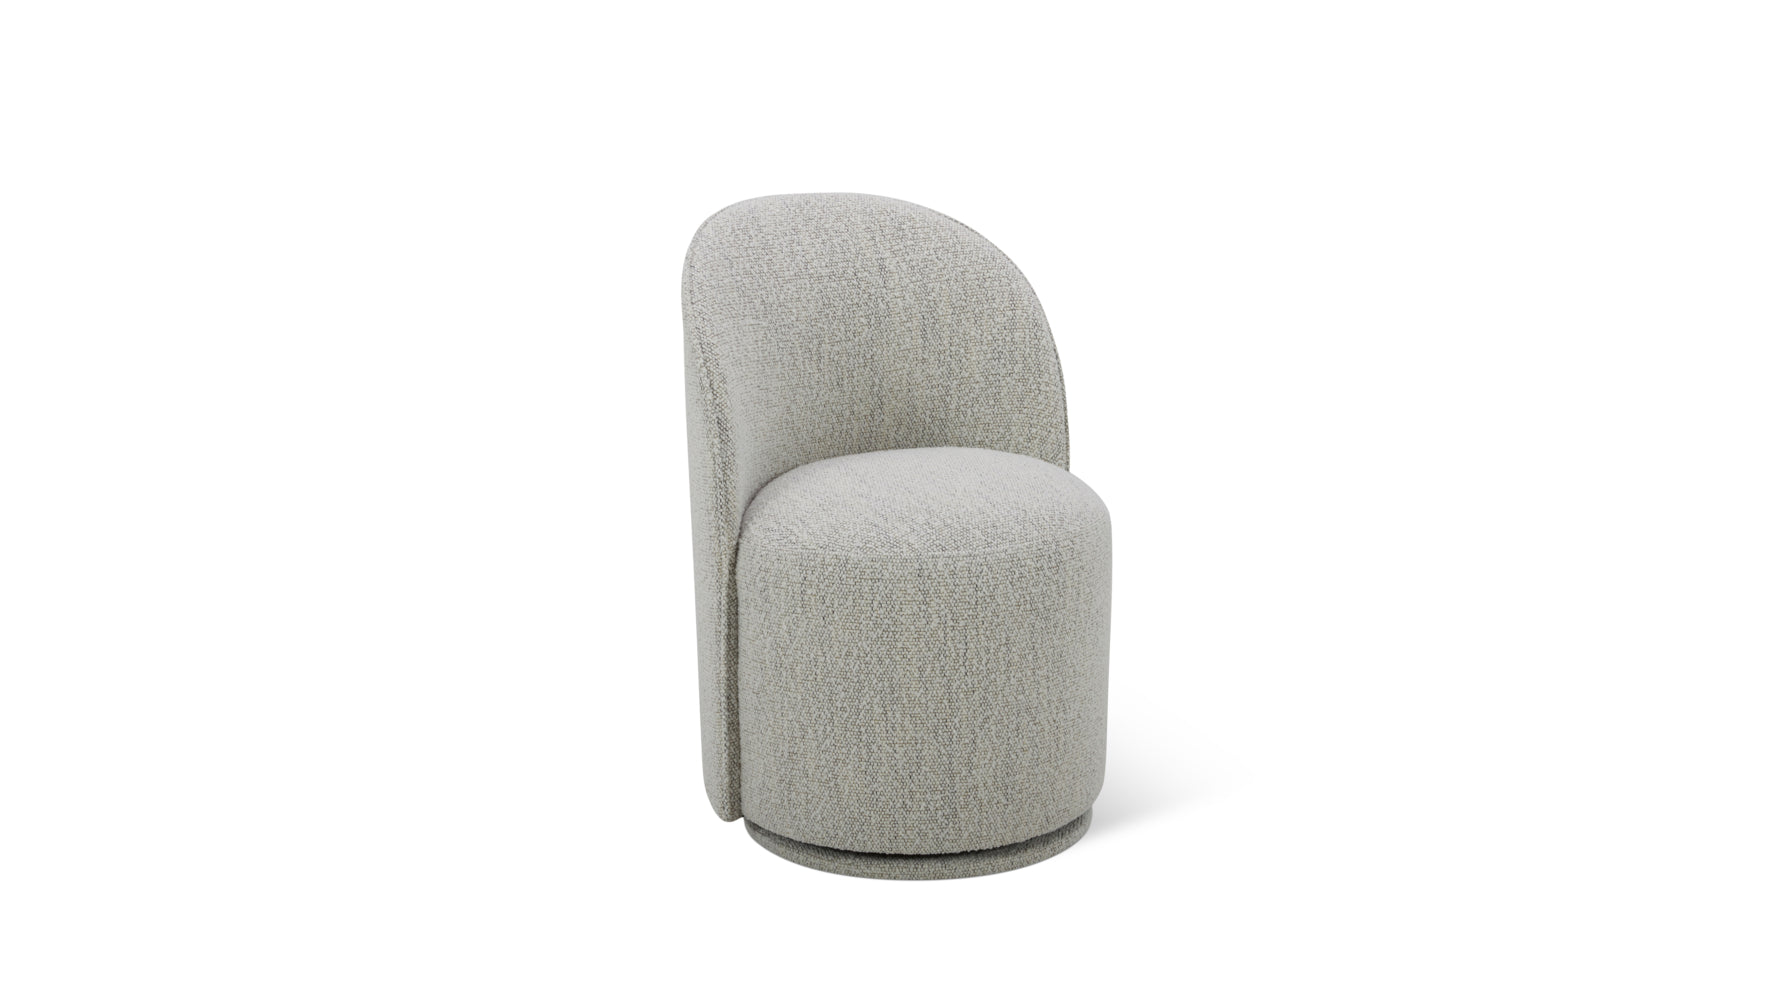 Dialed In Swivel Dining Chair, Arctic - Image 1